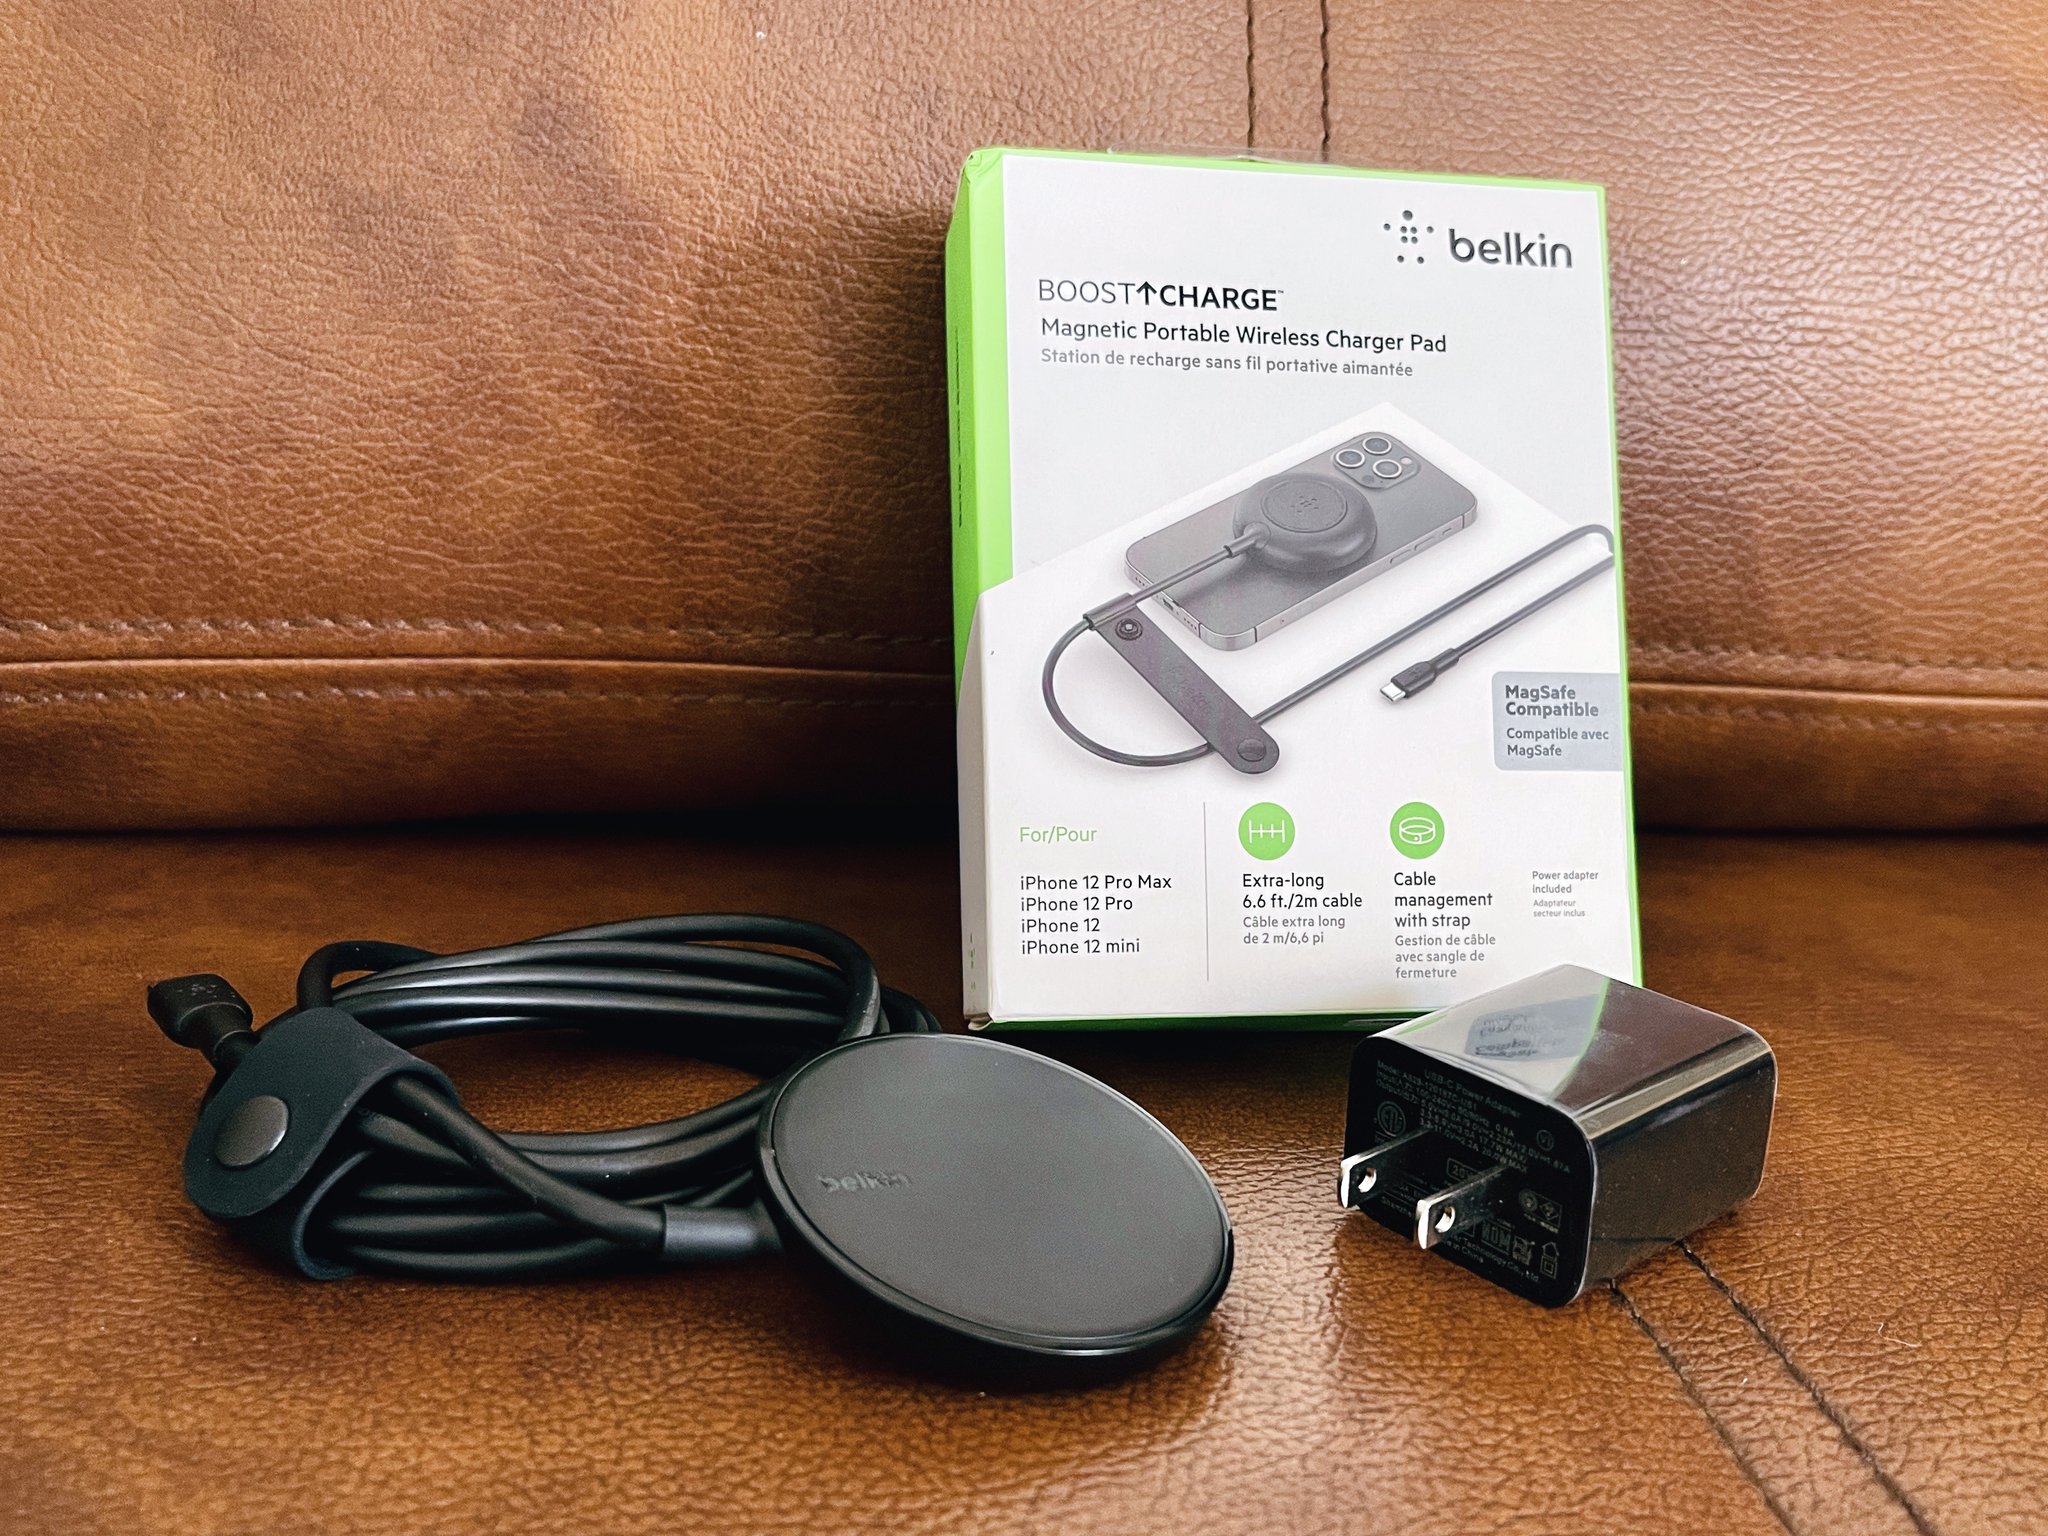 Belkin Boost↑Charge Pro Portable Wireless Charger Pad with MagSafe review